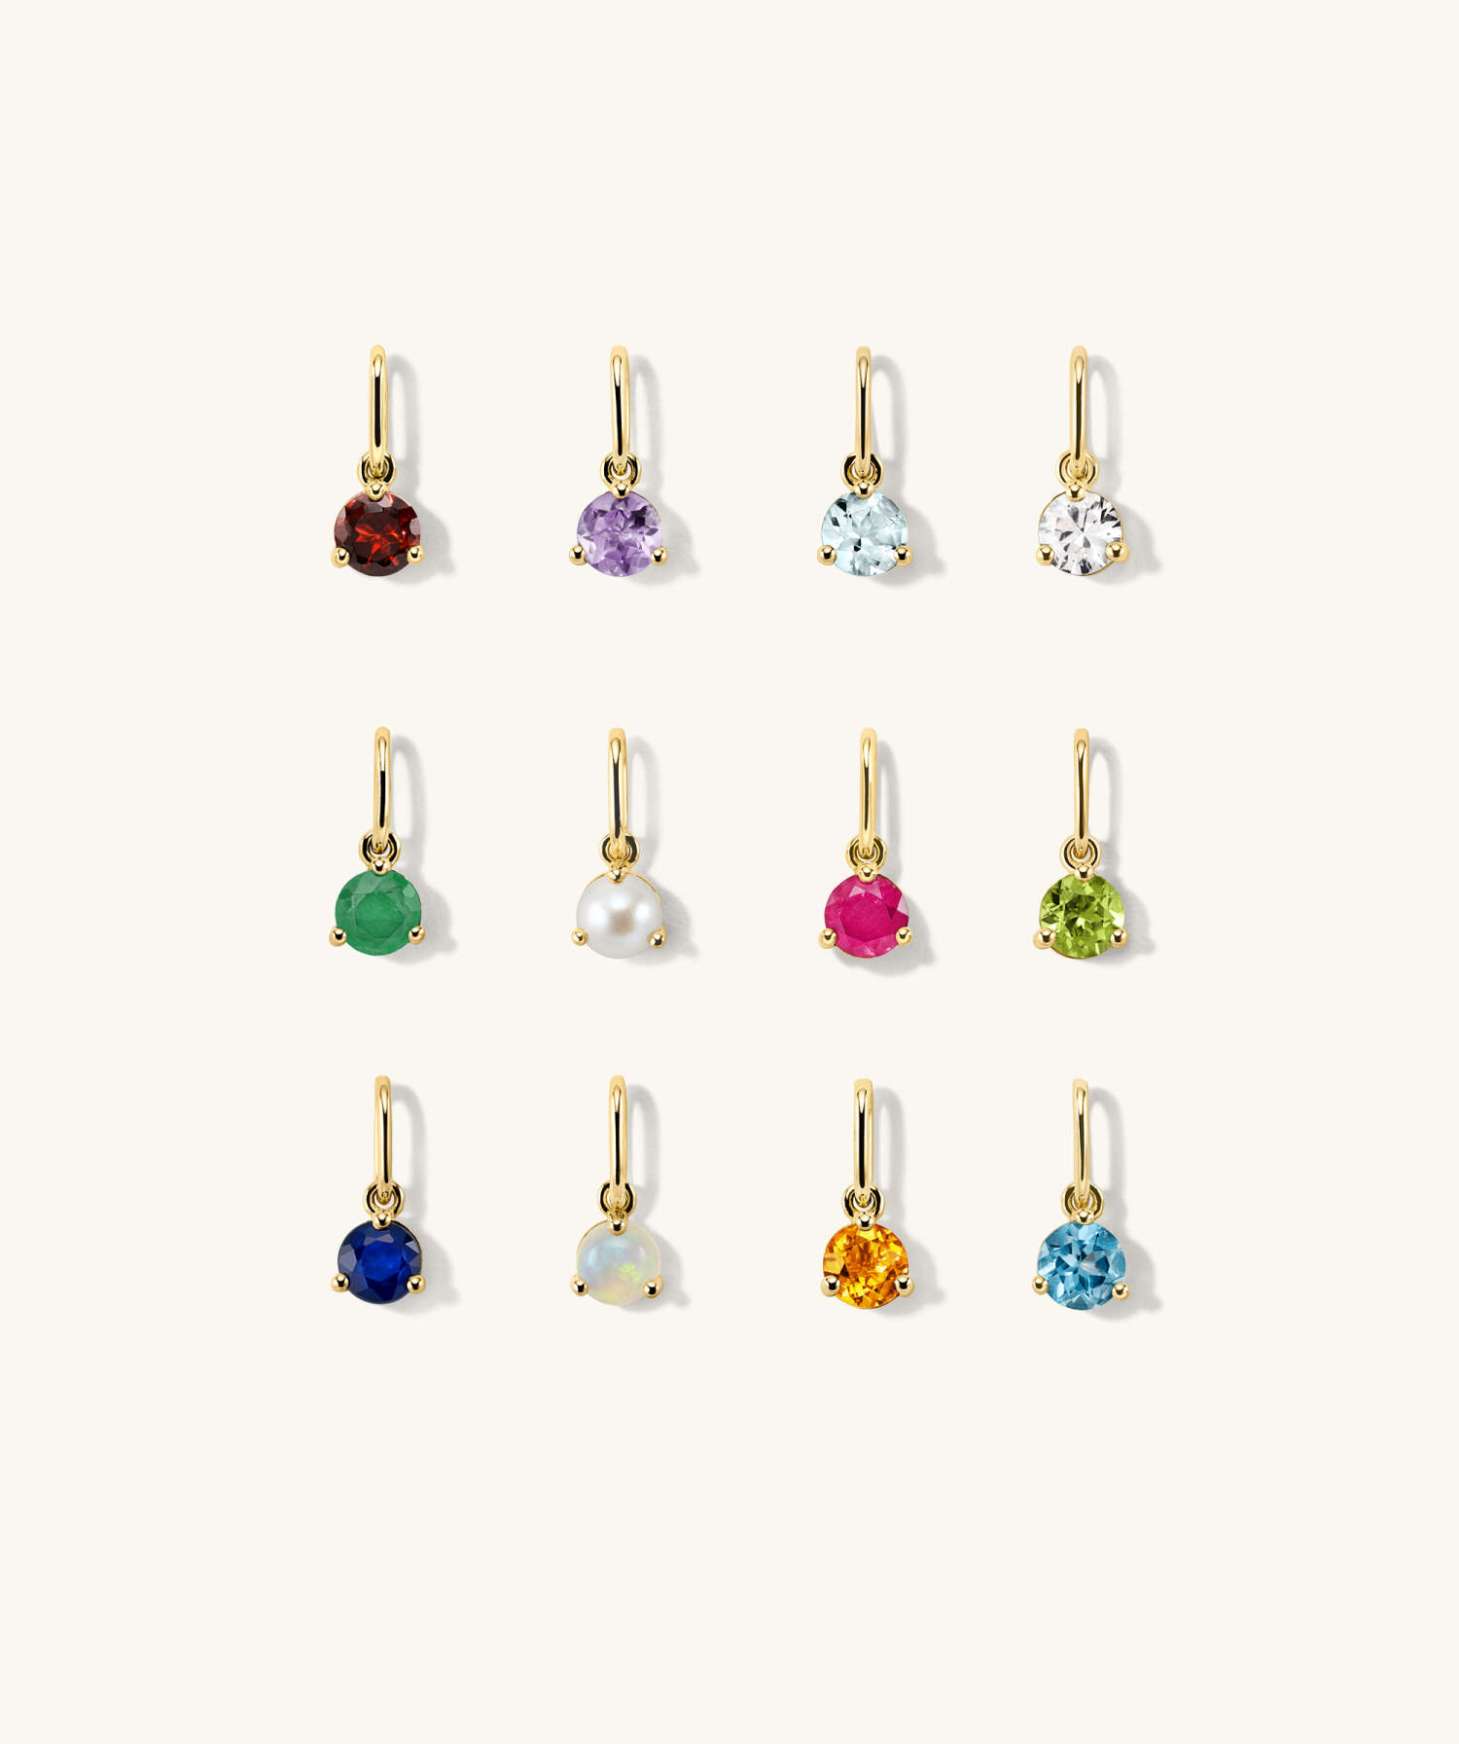 mejuri birthstone pendants, from our mother's day gift gudie